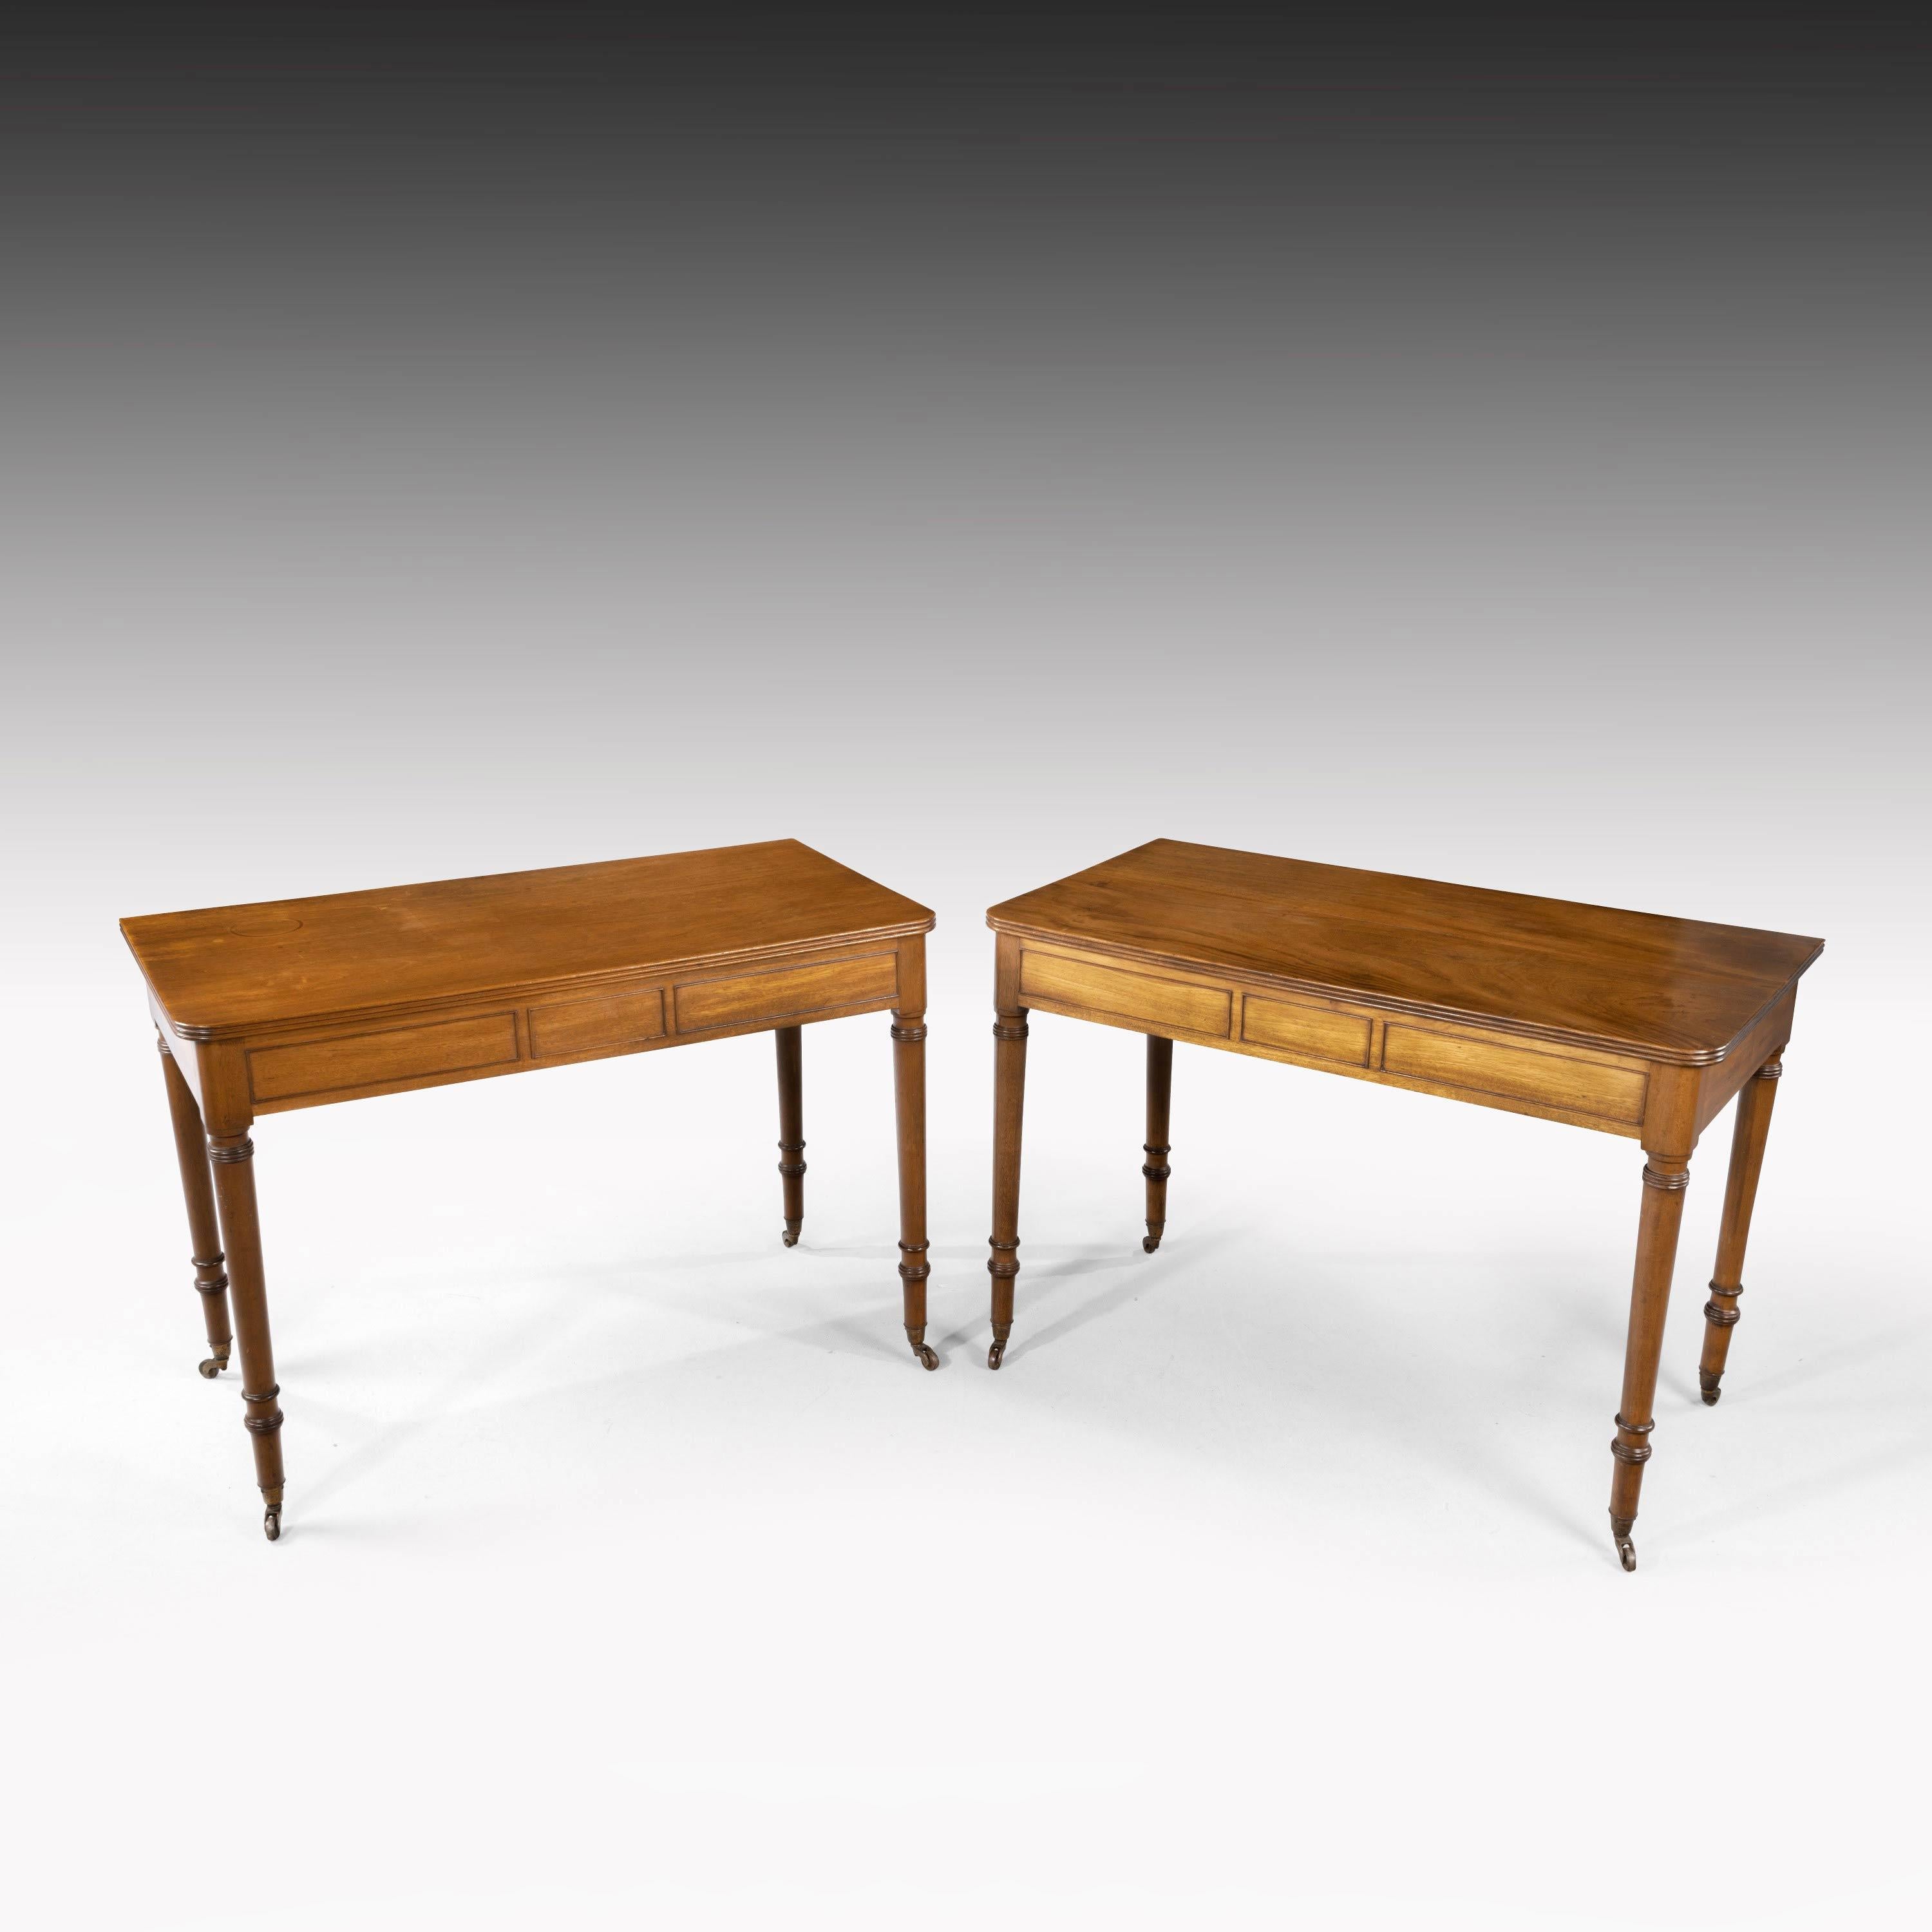 English Attractive George III Mahogany Dining Table / Pair of Pier Tables